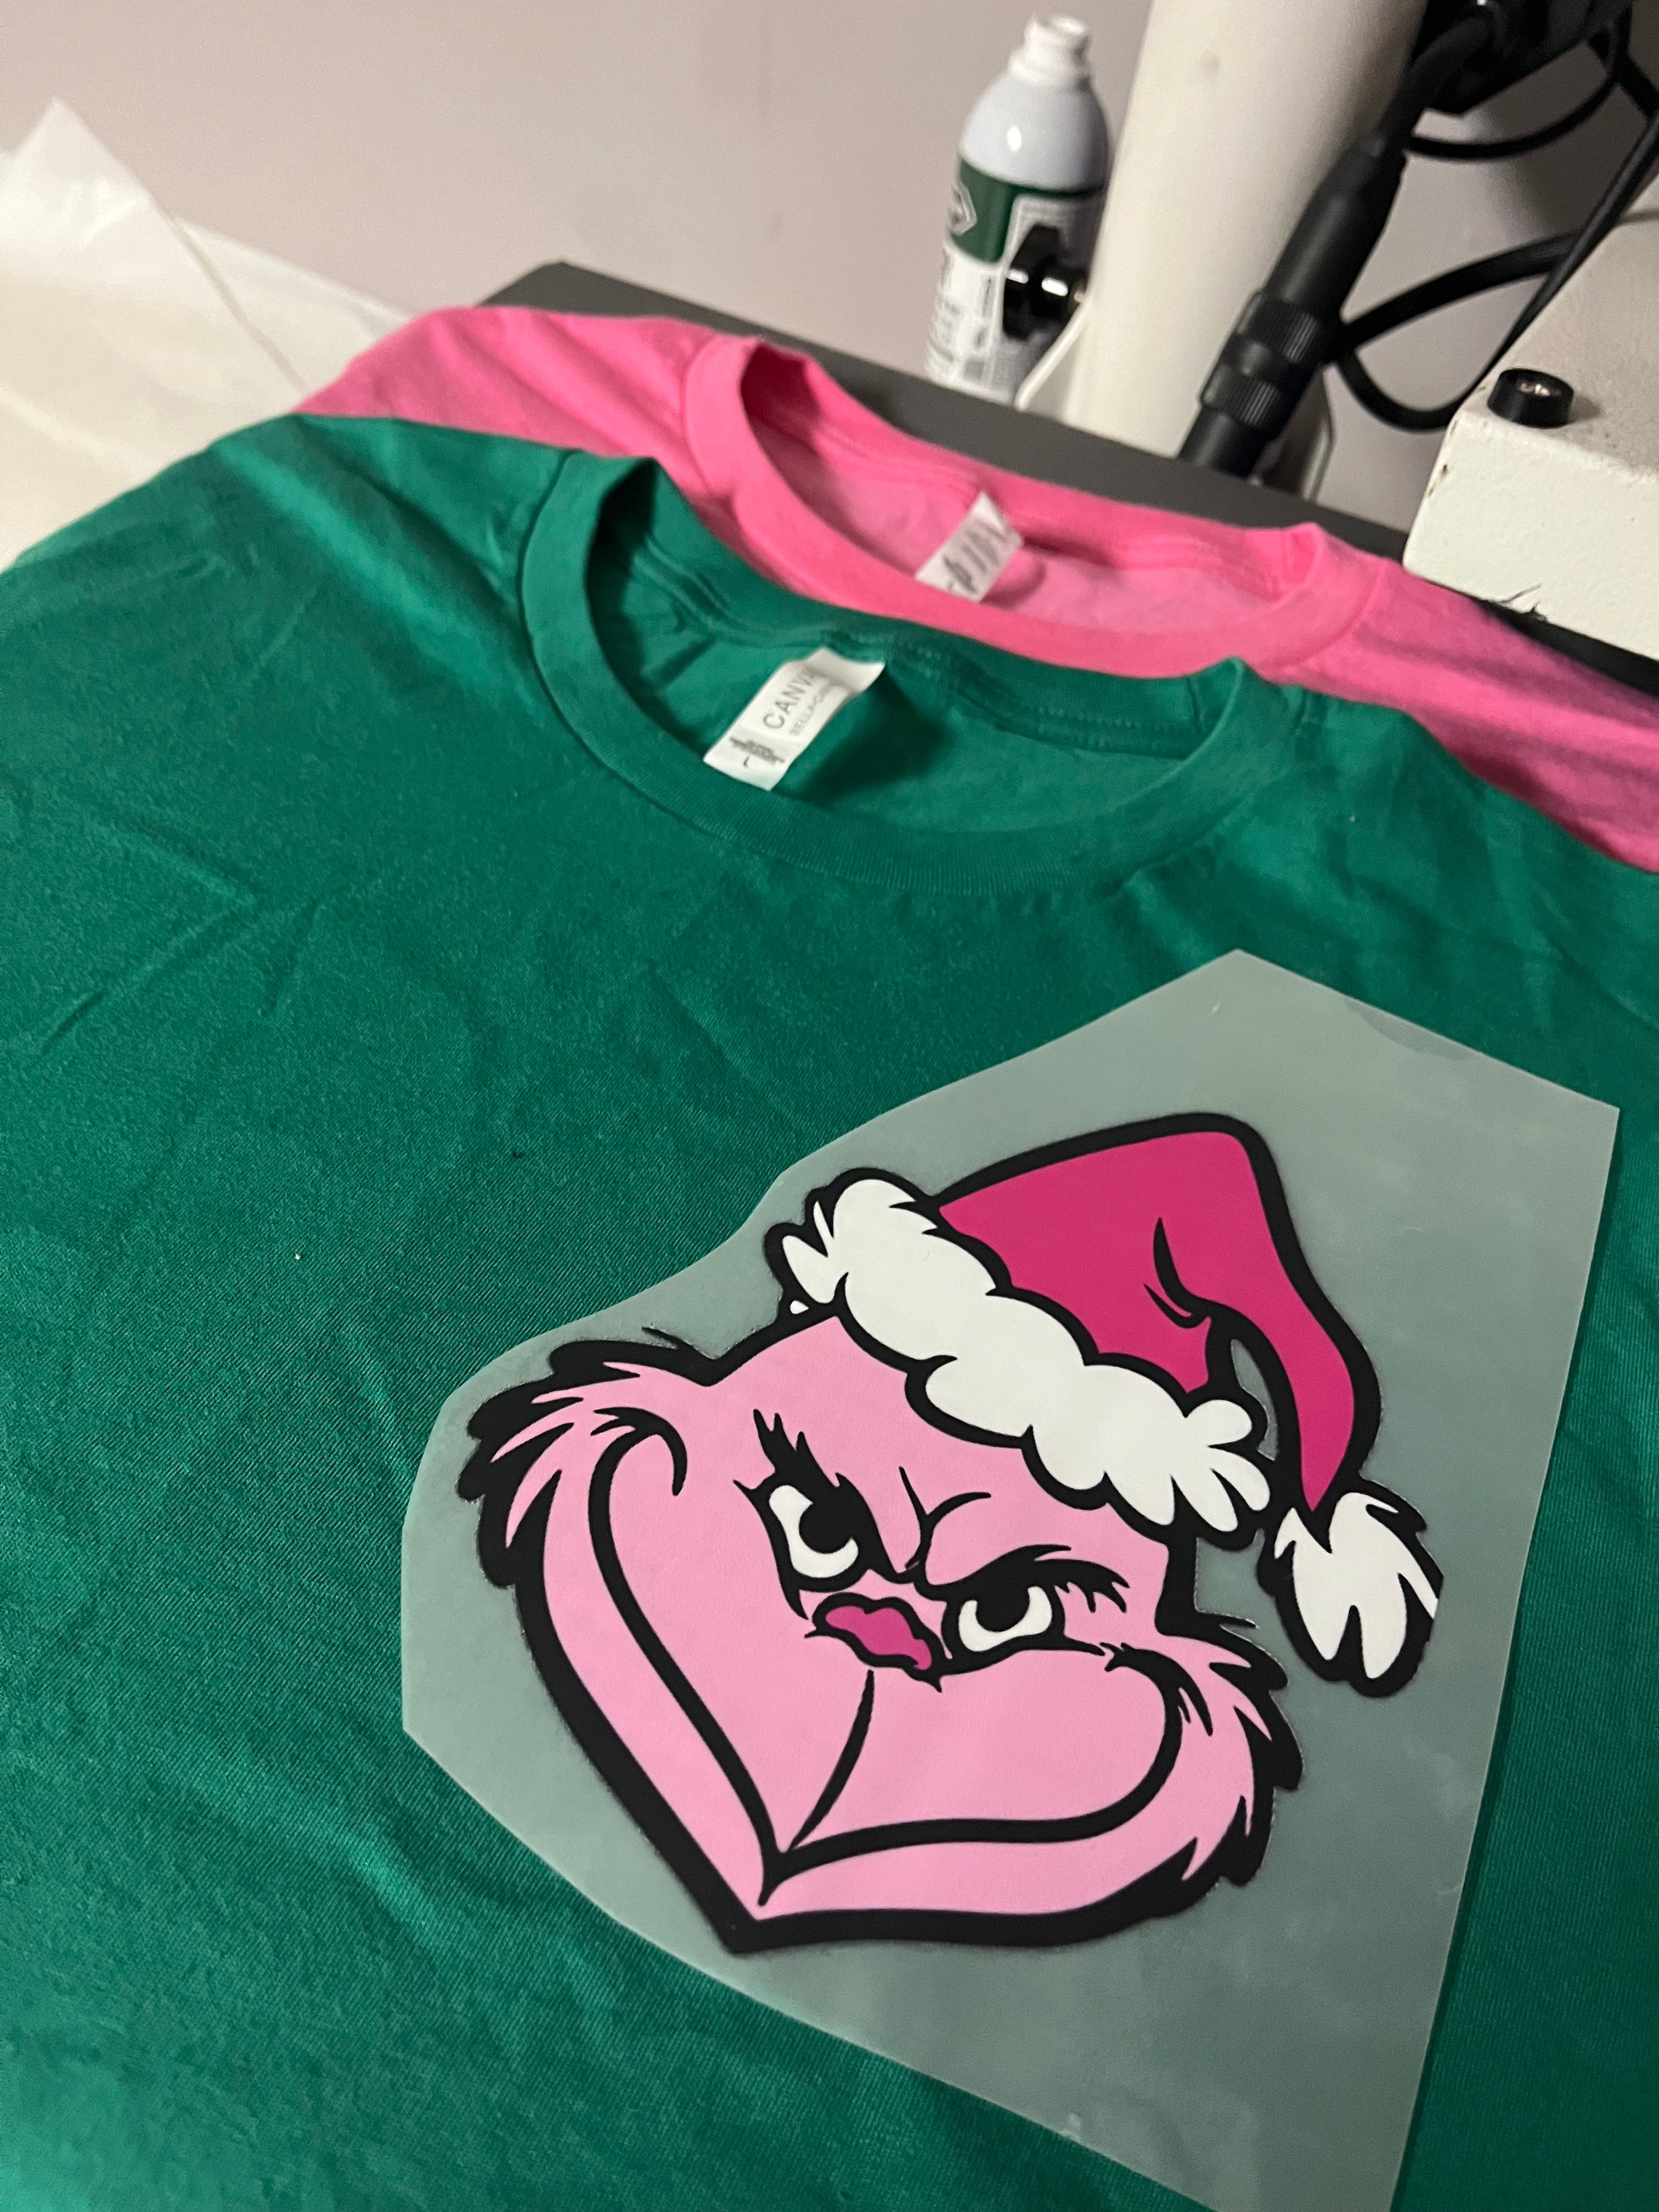 Green Guy in Pink (pocket size print)